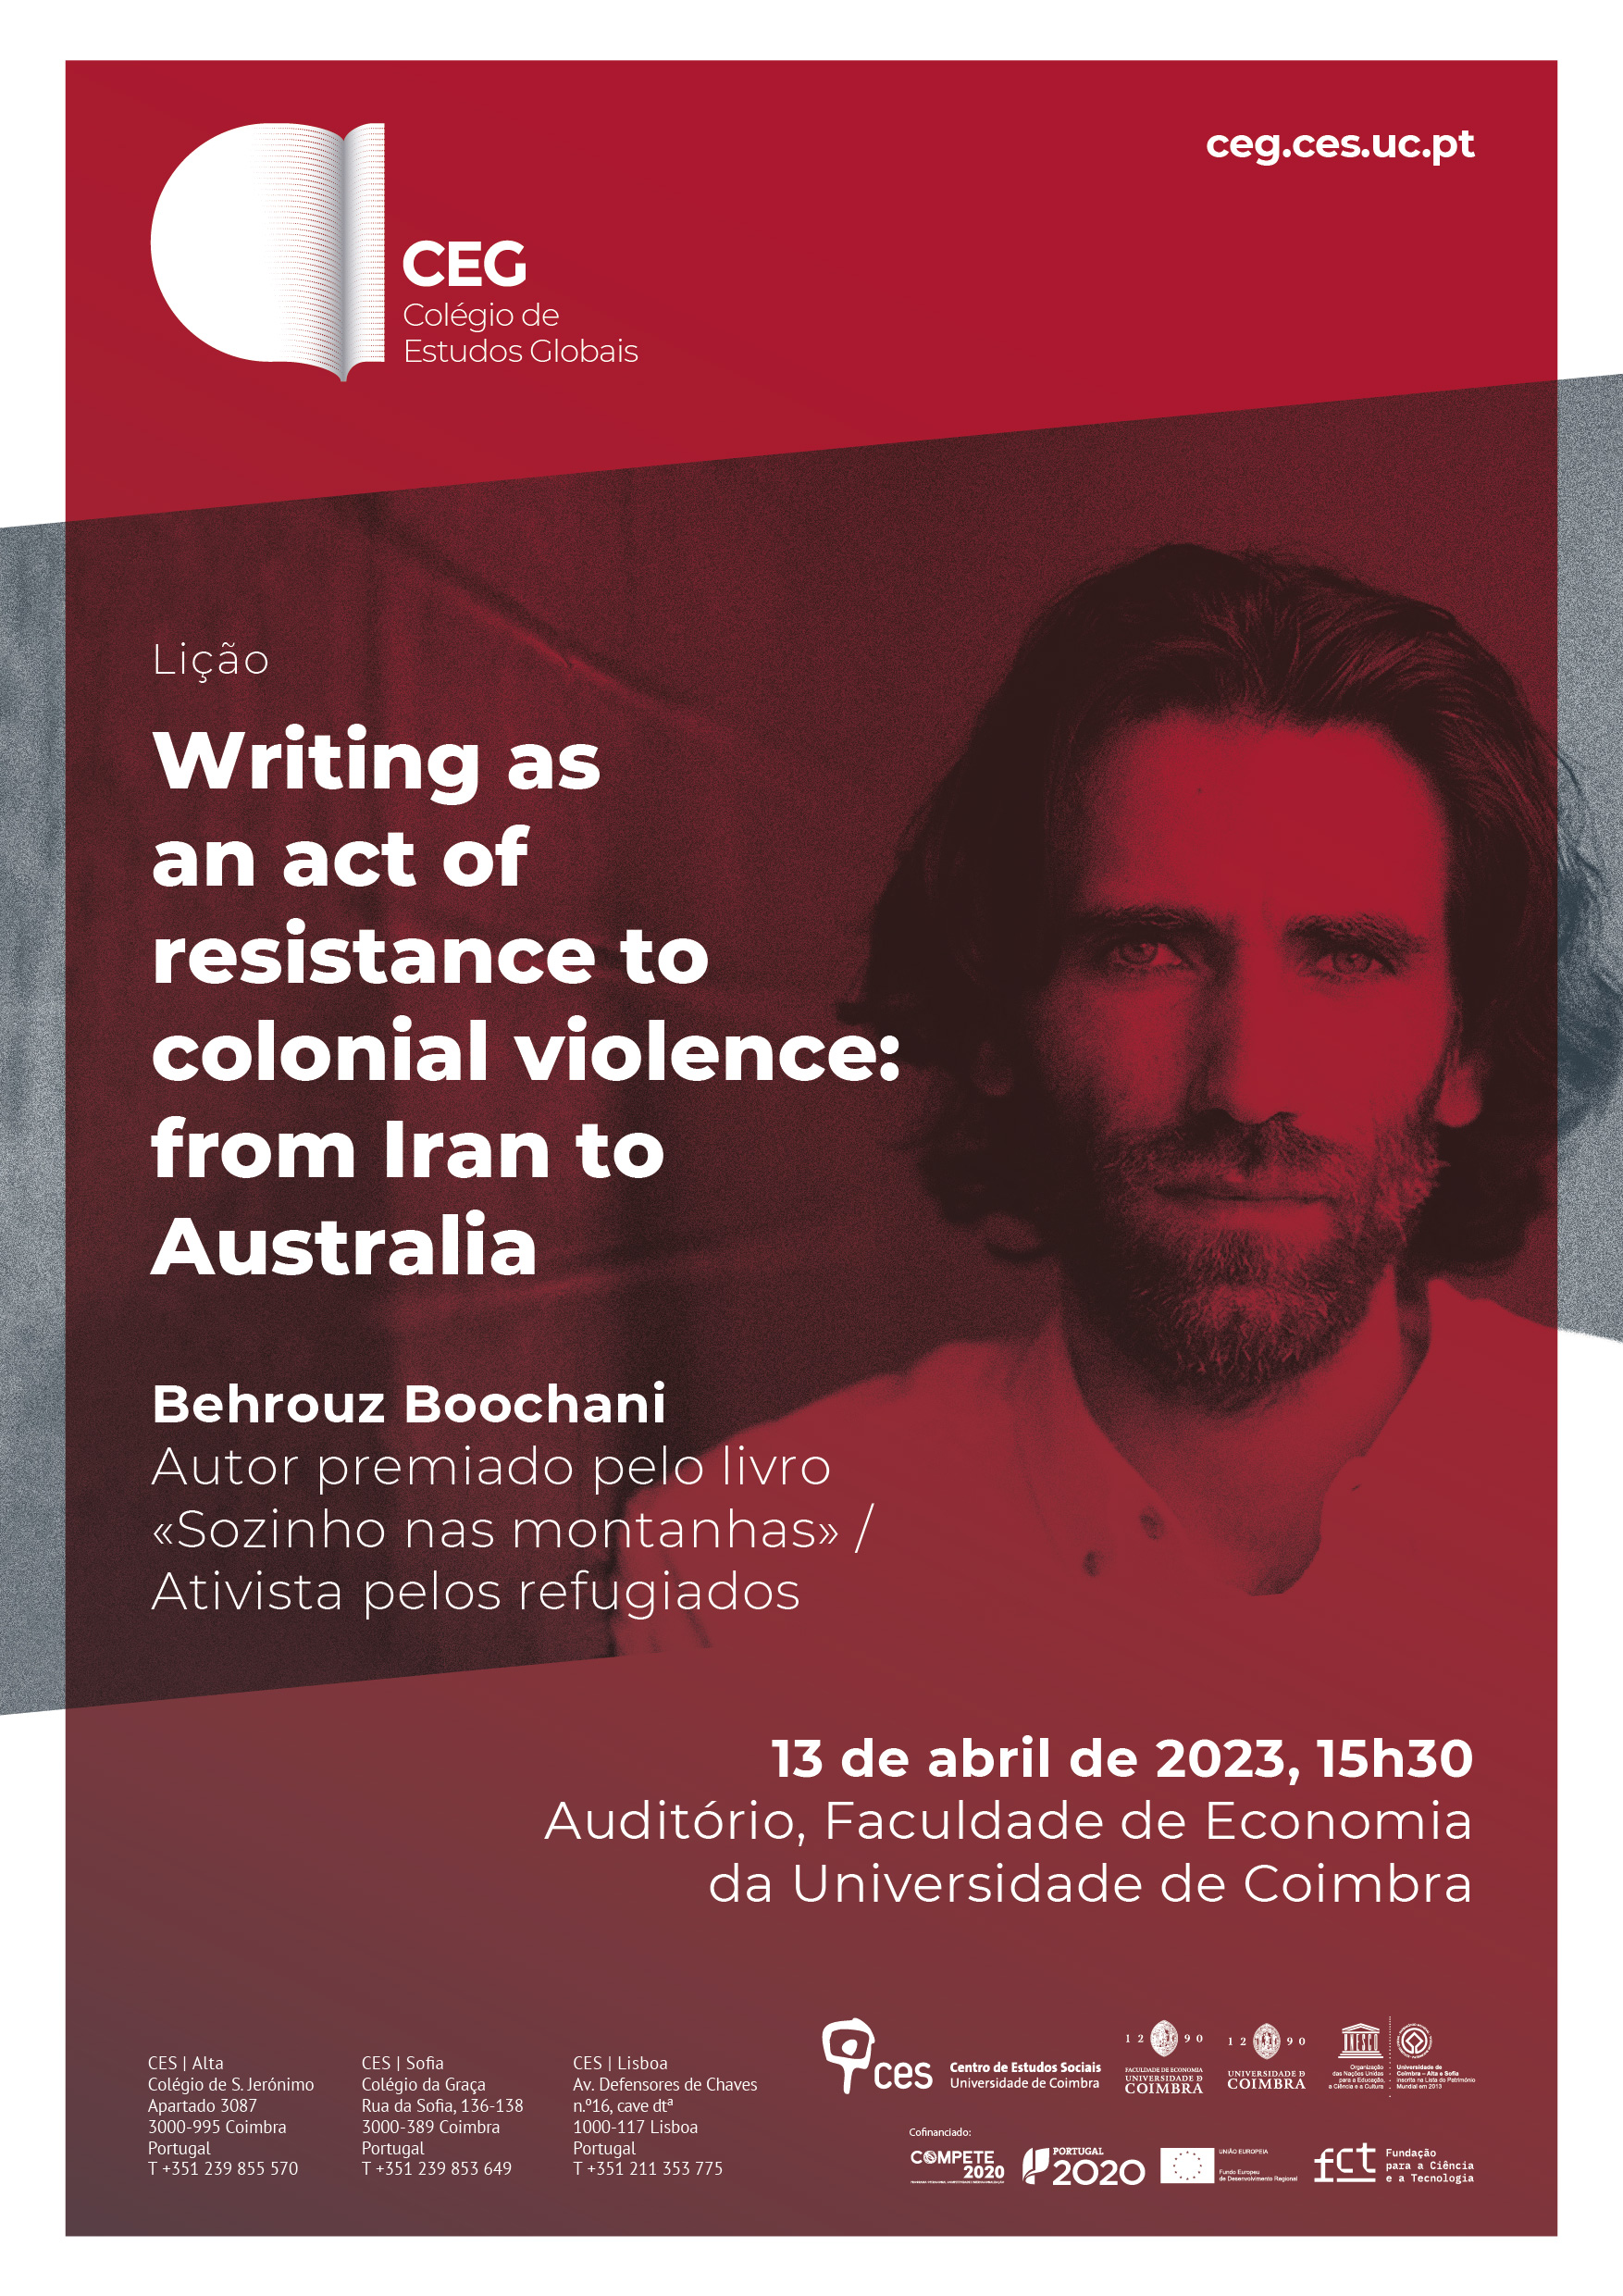 Writing as an act of resistance to colonial violence: from Iran to Australia<span id="edit_42066"><script>$(function() { $('#edit_42066').load( "/myces/user/editobj.php?tipo=evento&id=42066" ); });</script></span>